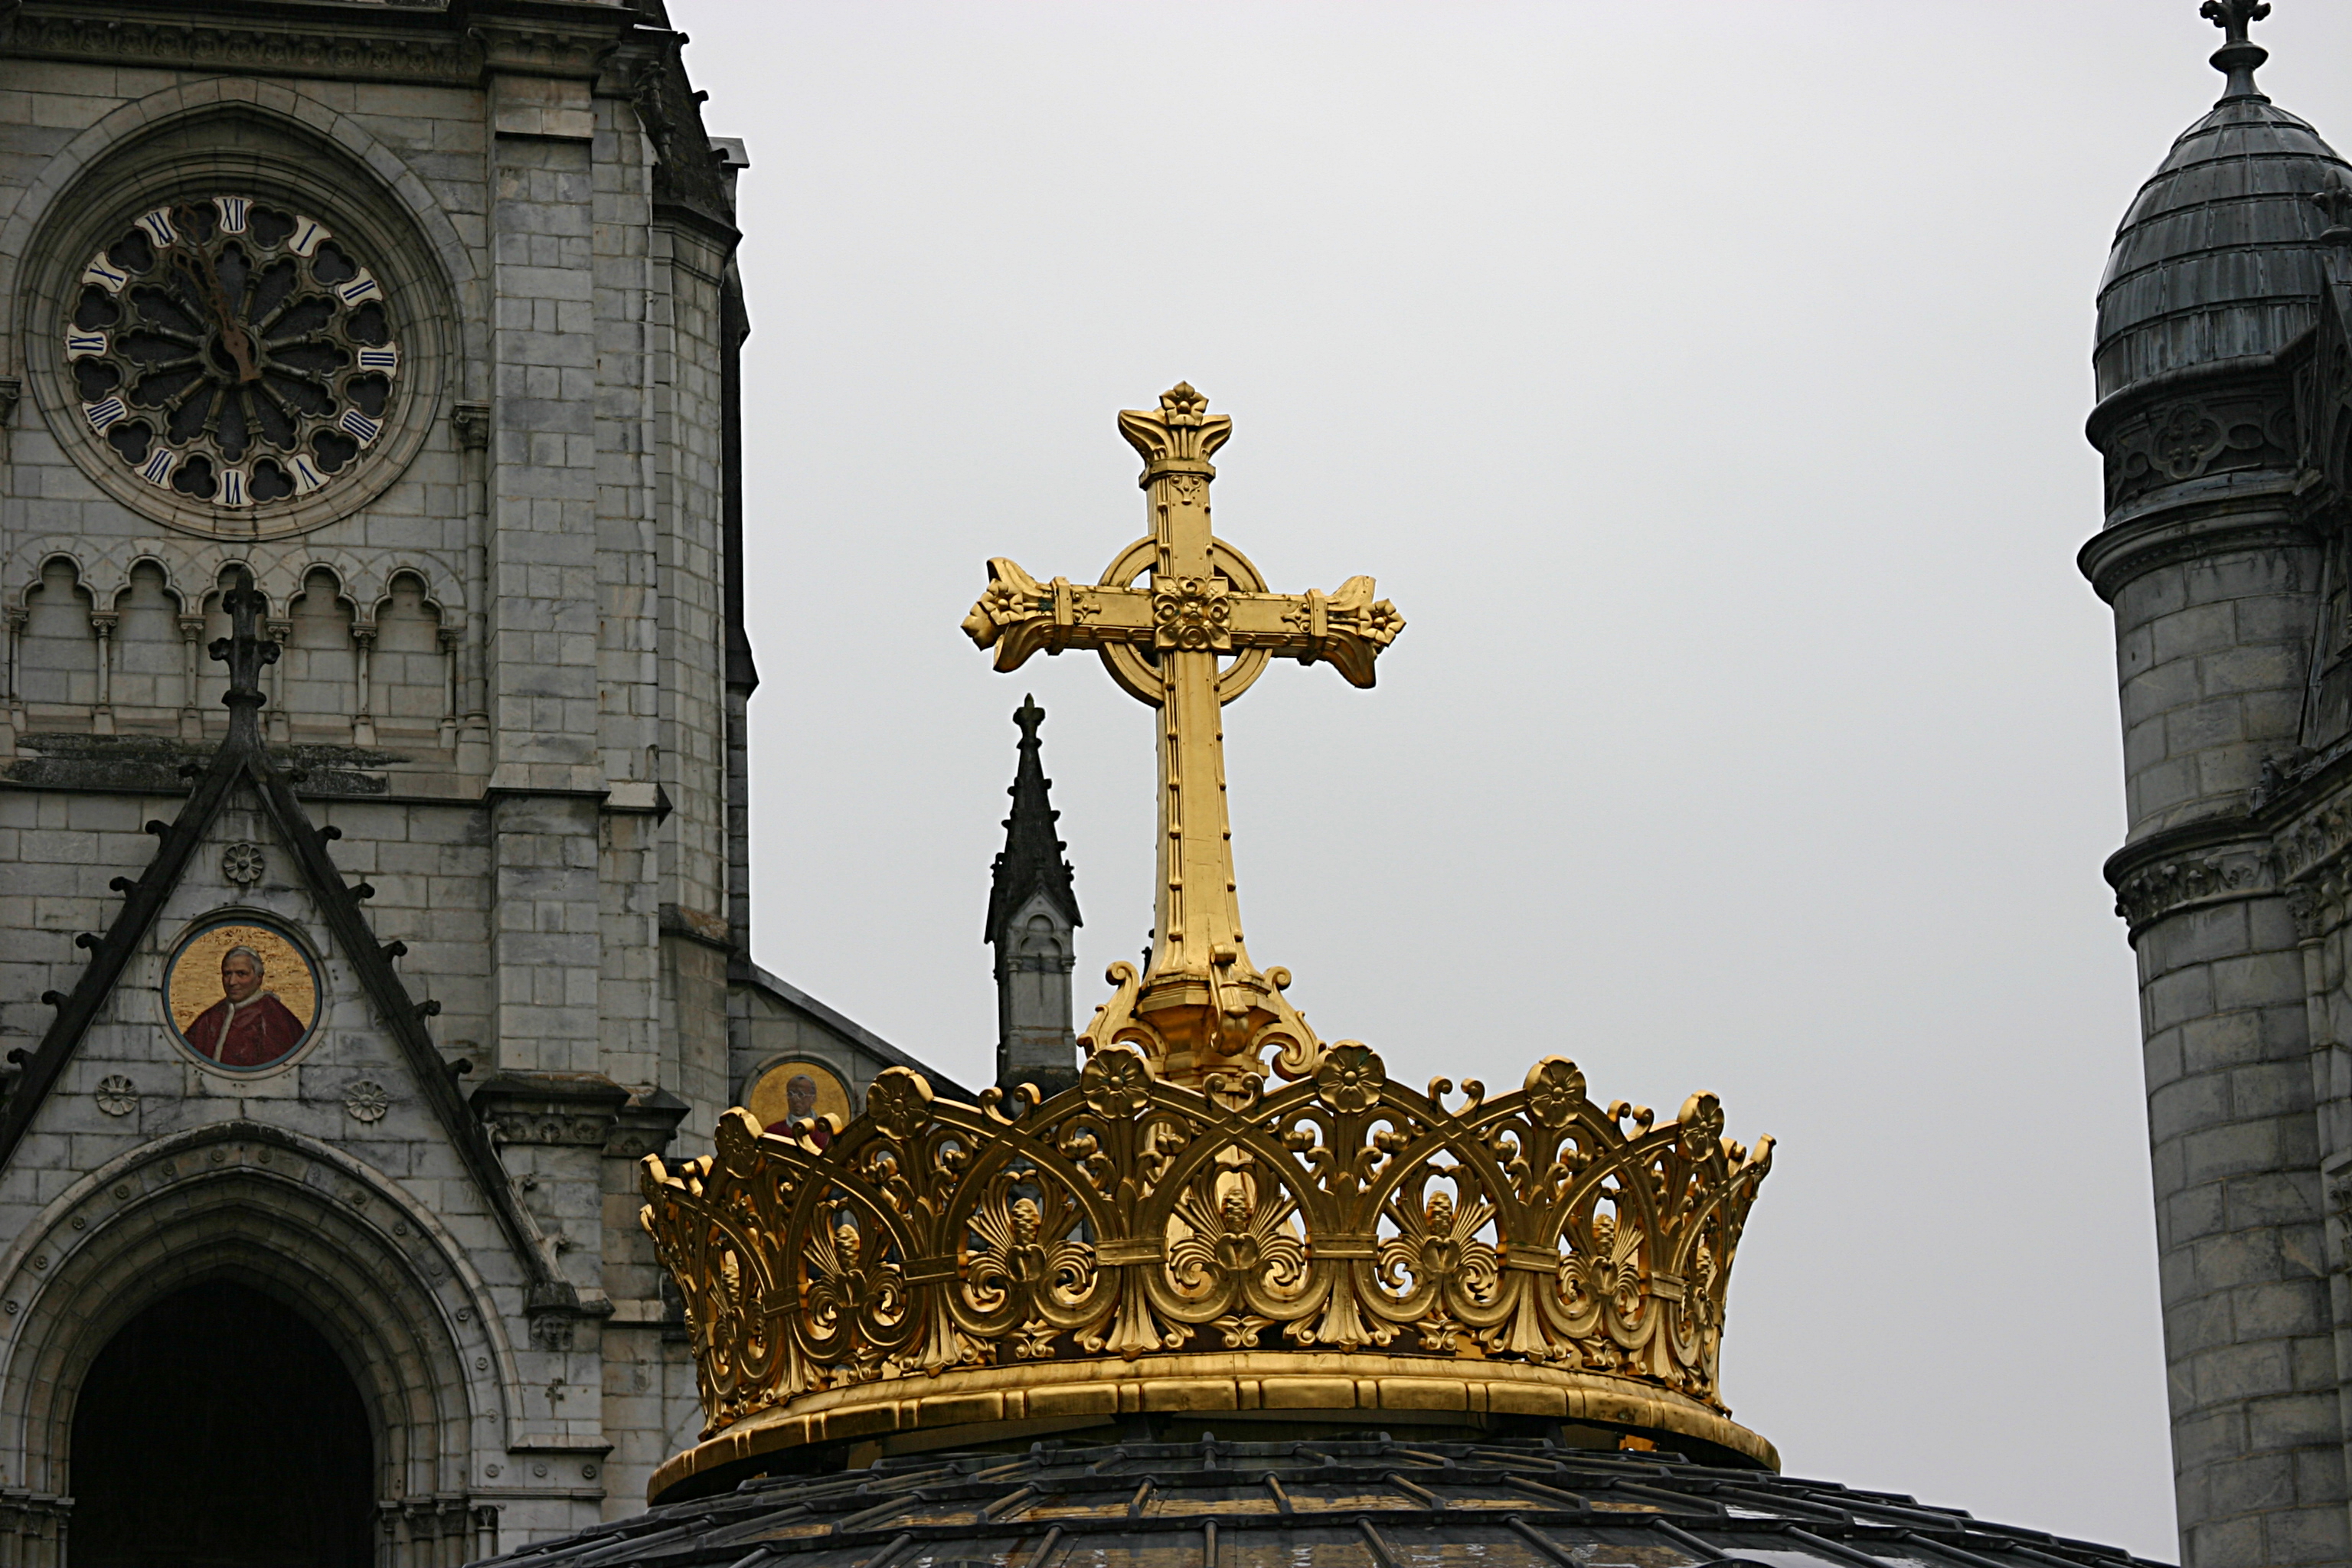 Celtic Cross and Crown over the Rosary Basilica.